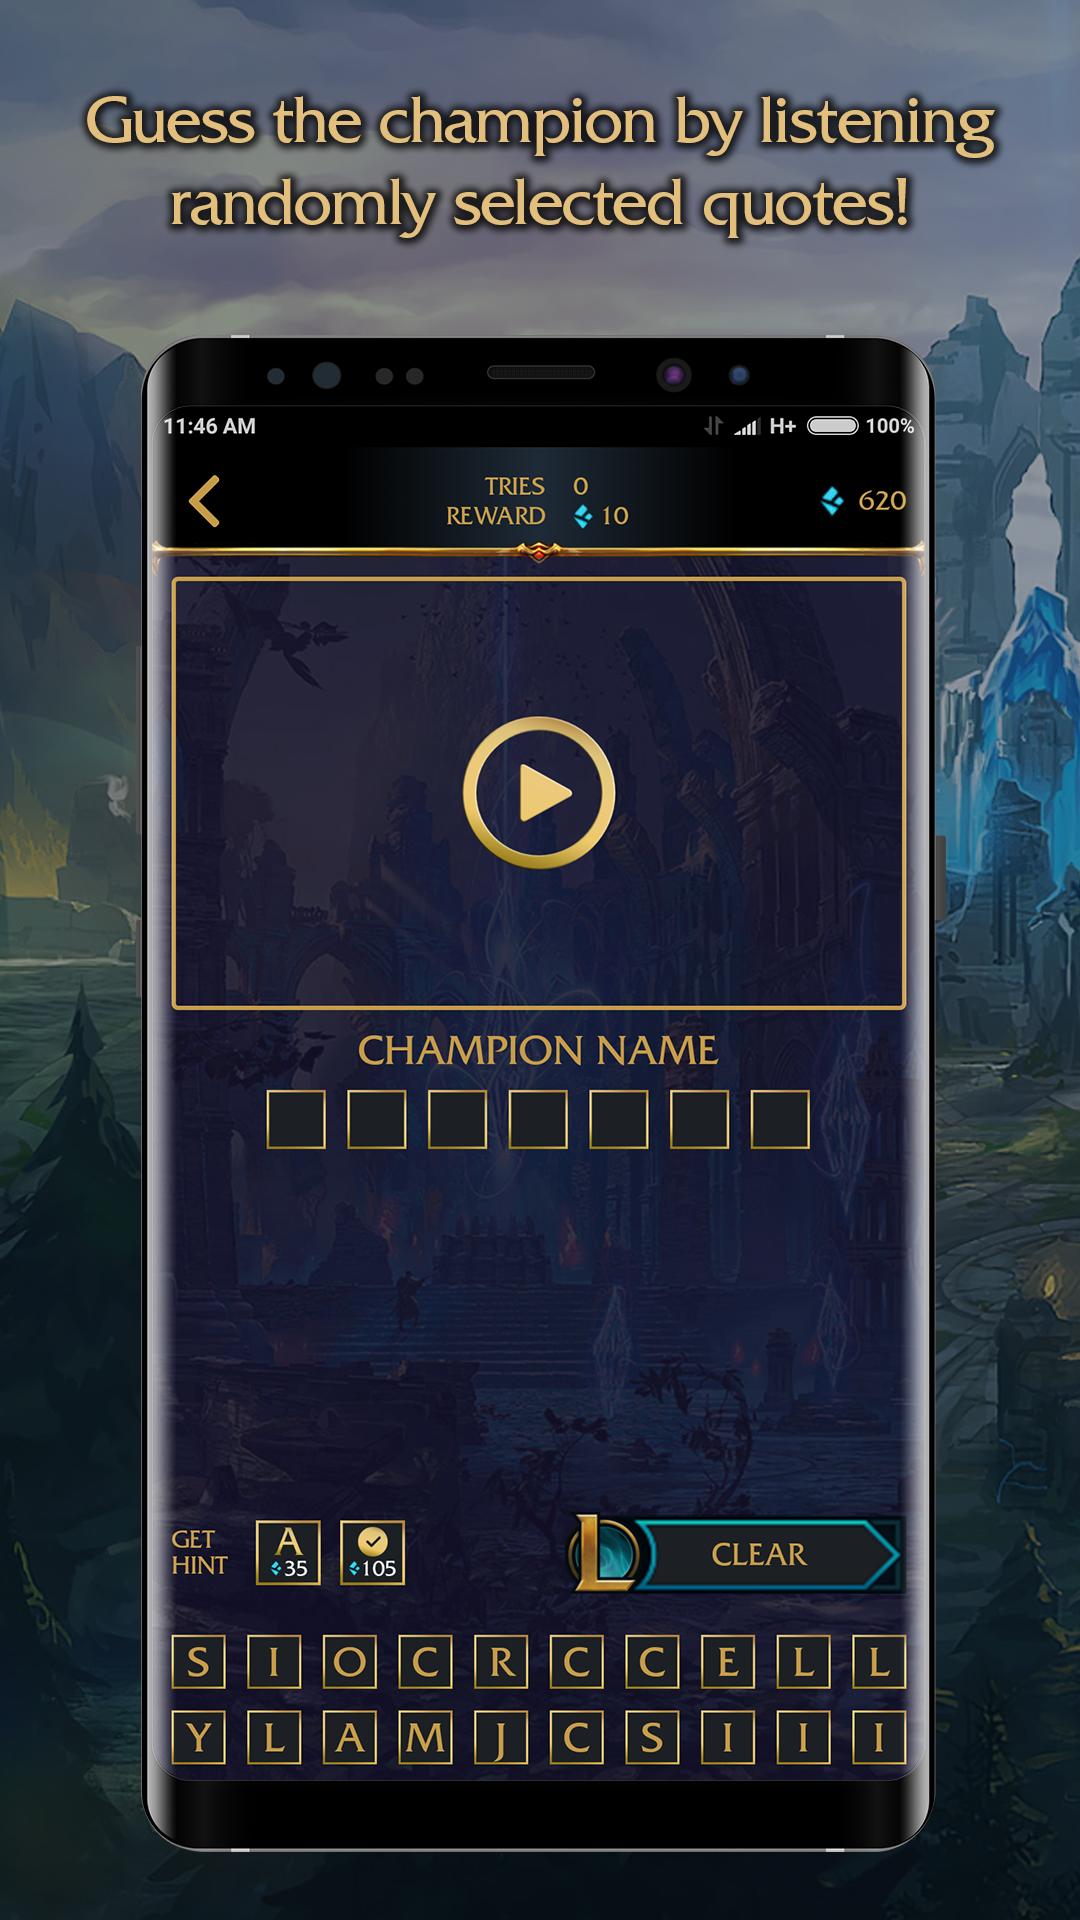 Mobile Quiz for League of Legends LoL Champions for Android - APK Download